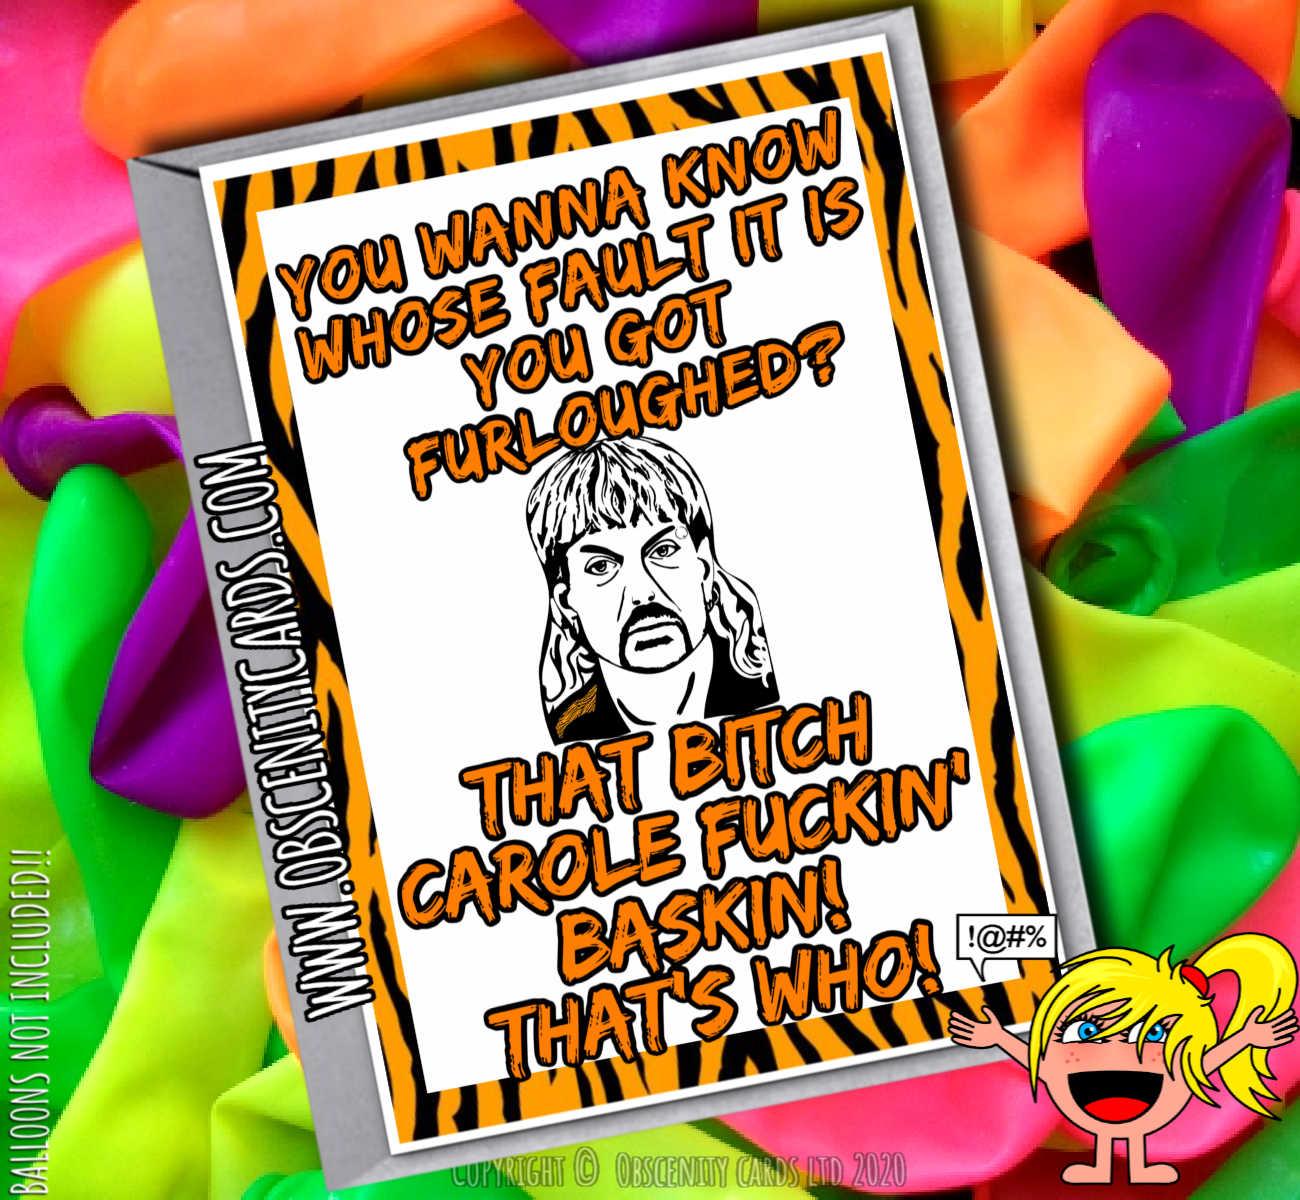 YOU WANNA KNOW WHOSE FAULT IT IS YOU GOT FURLOUGHED? THAT BITCH CAROLE FUCKING BASKIN! TIGER KING FUNNY CARD